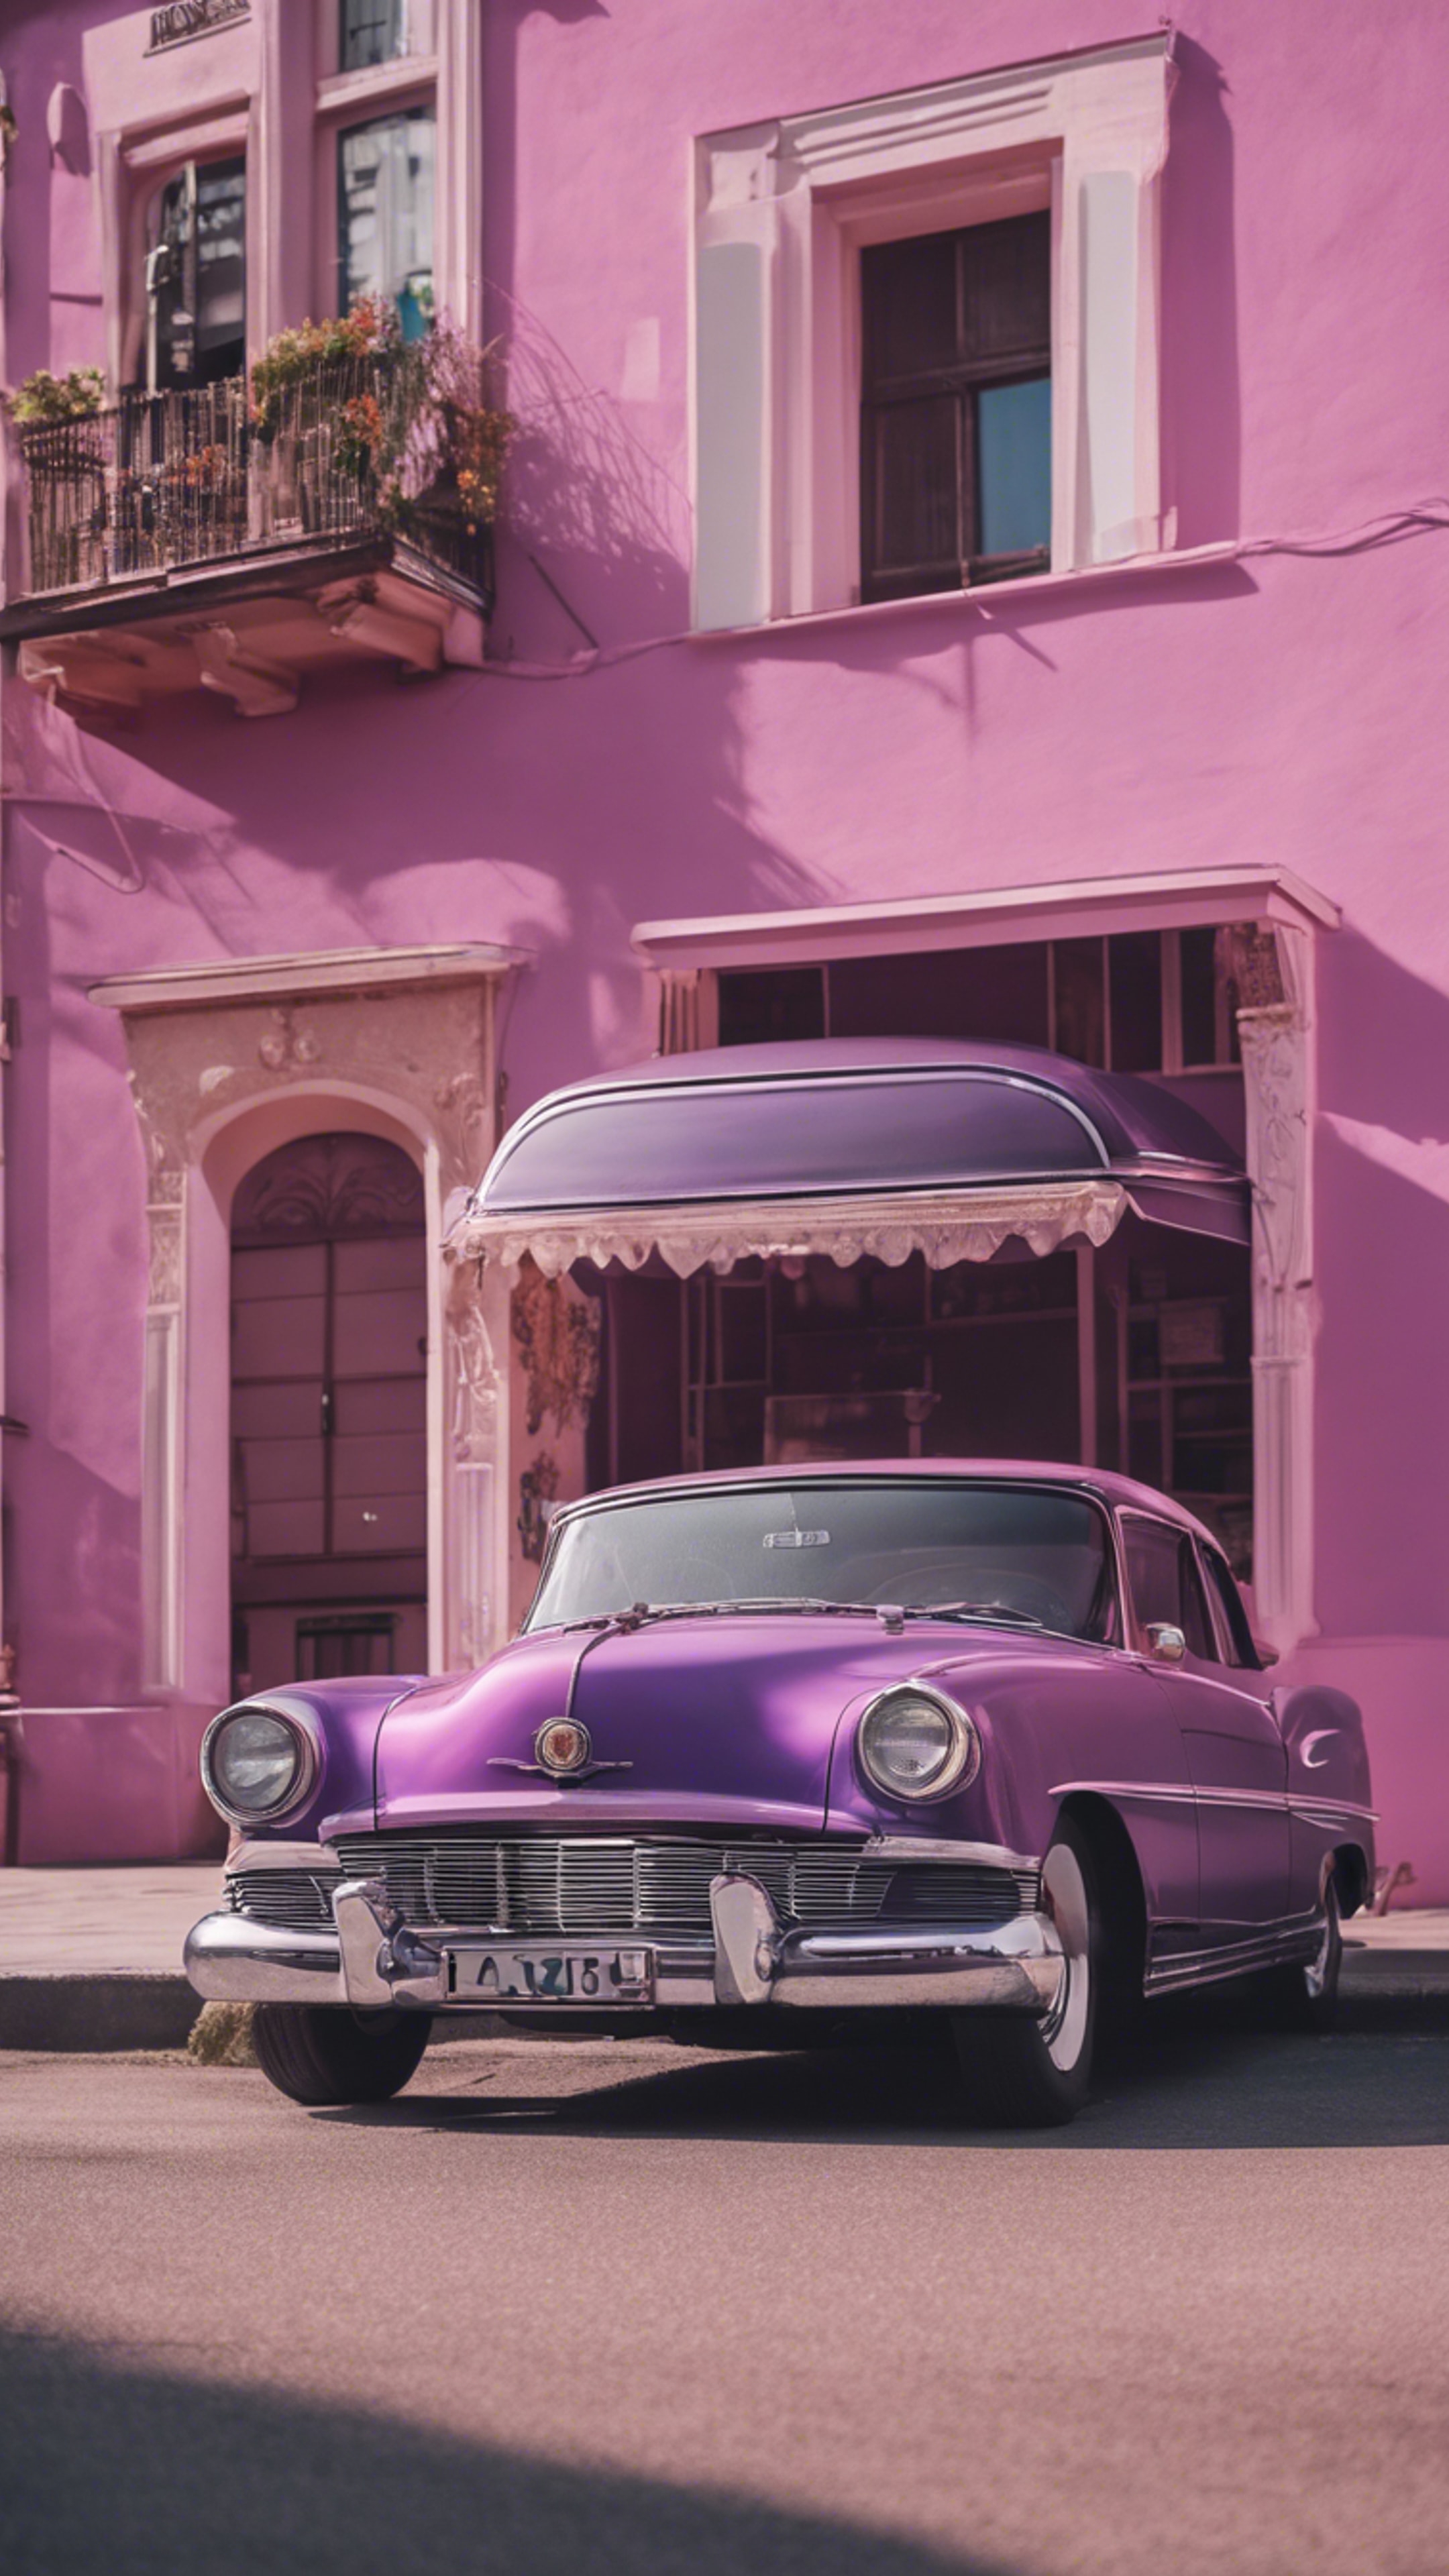 A purple vintage car parked by a pink pastel building. Tapetai[f1101ed4526e489a8b1f]